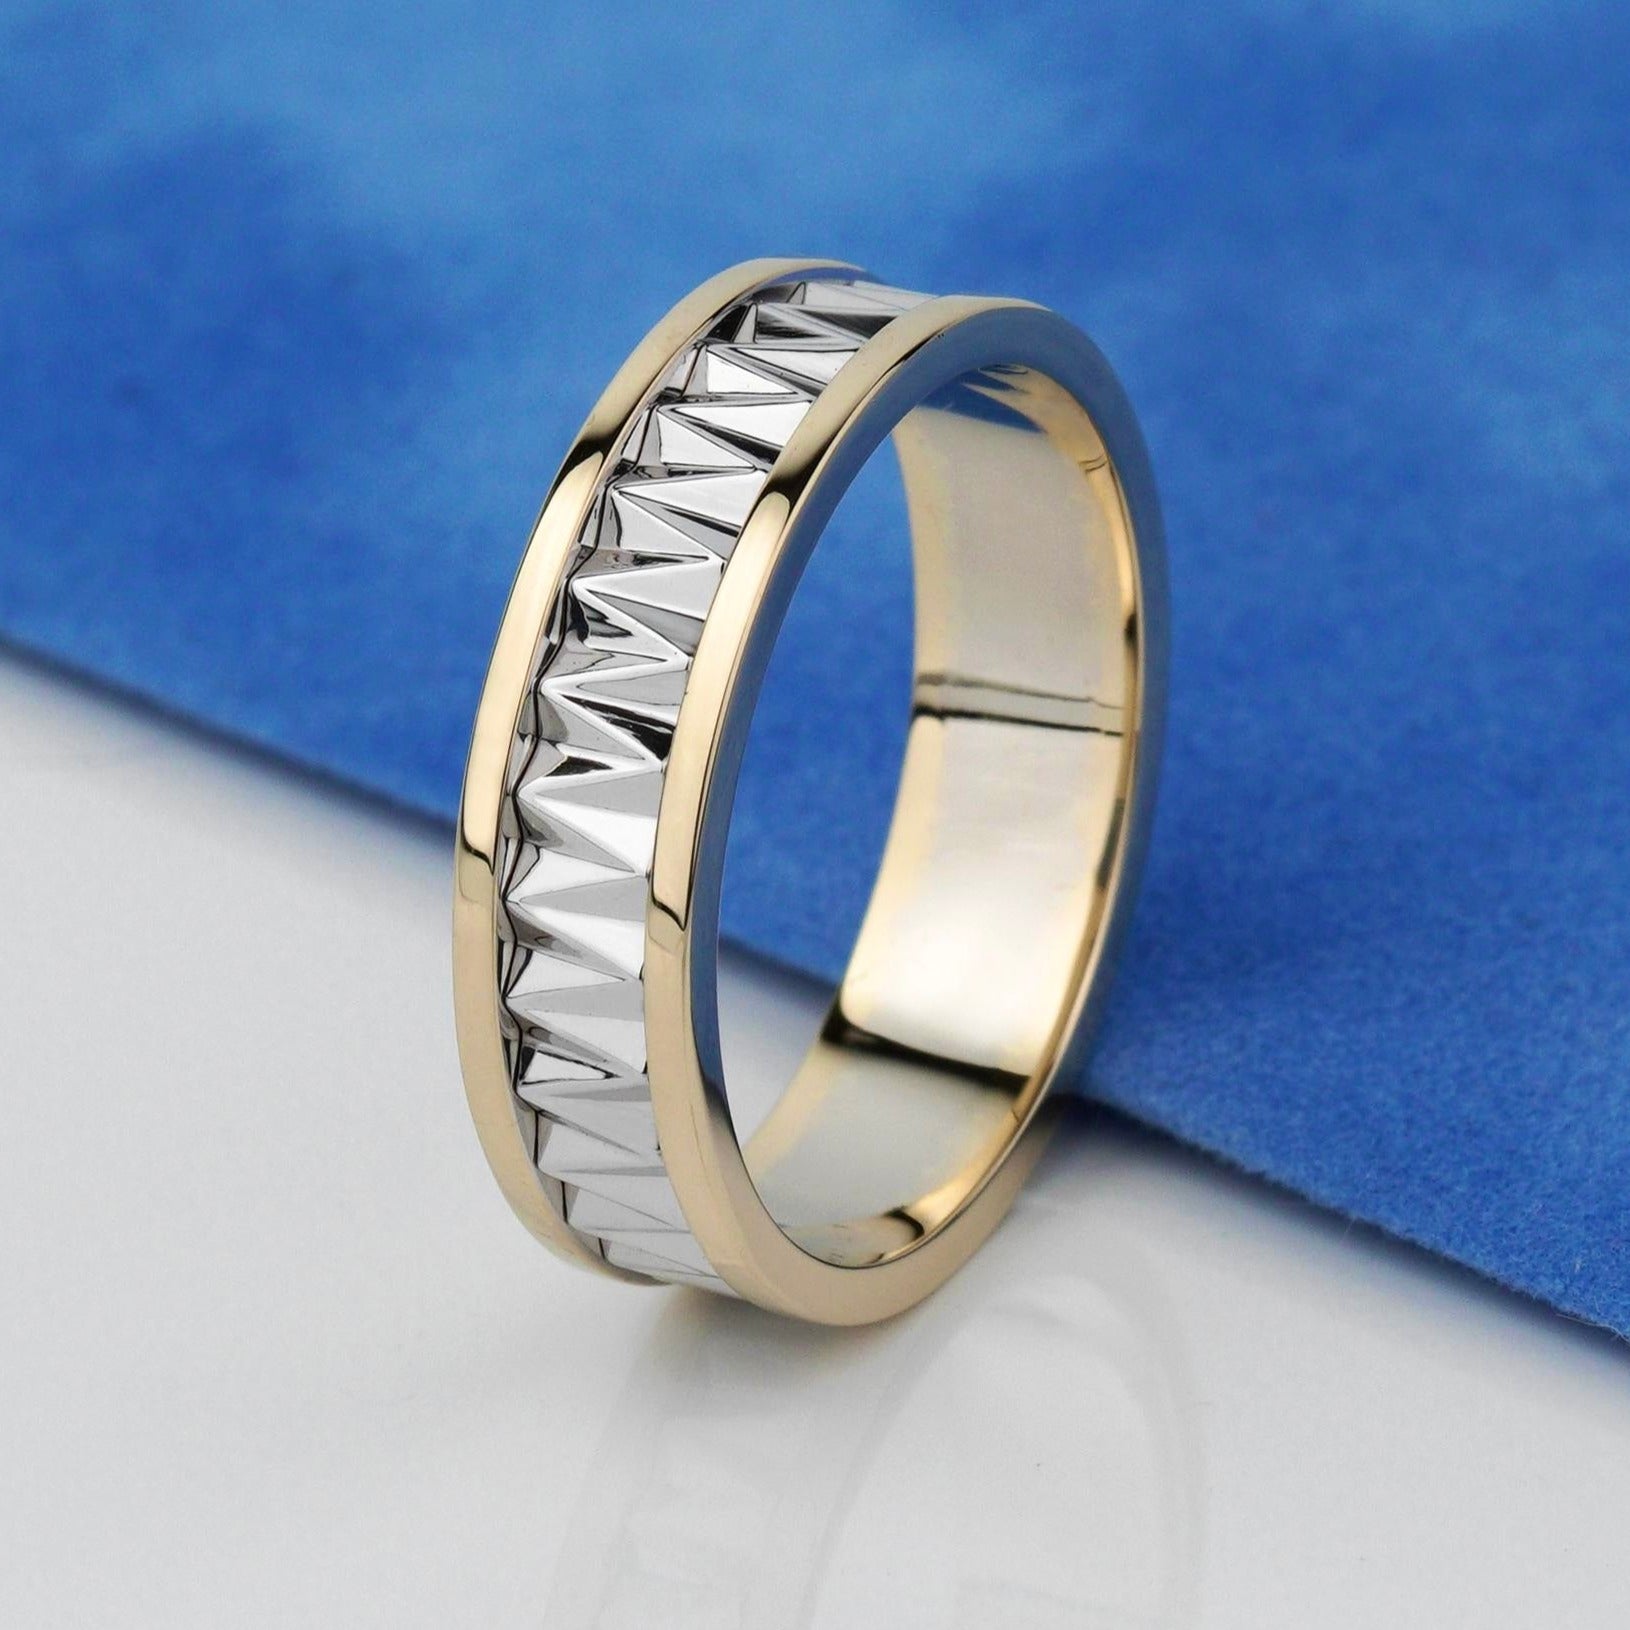 Unique gold wedding bands. Gold wedding bands for couples. Solid gold wedding rings set. Matching wedding bands. Modern wedding bands. Unique gold rings